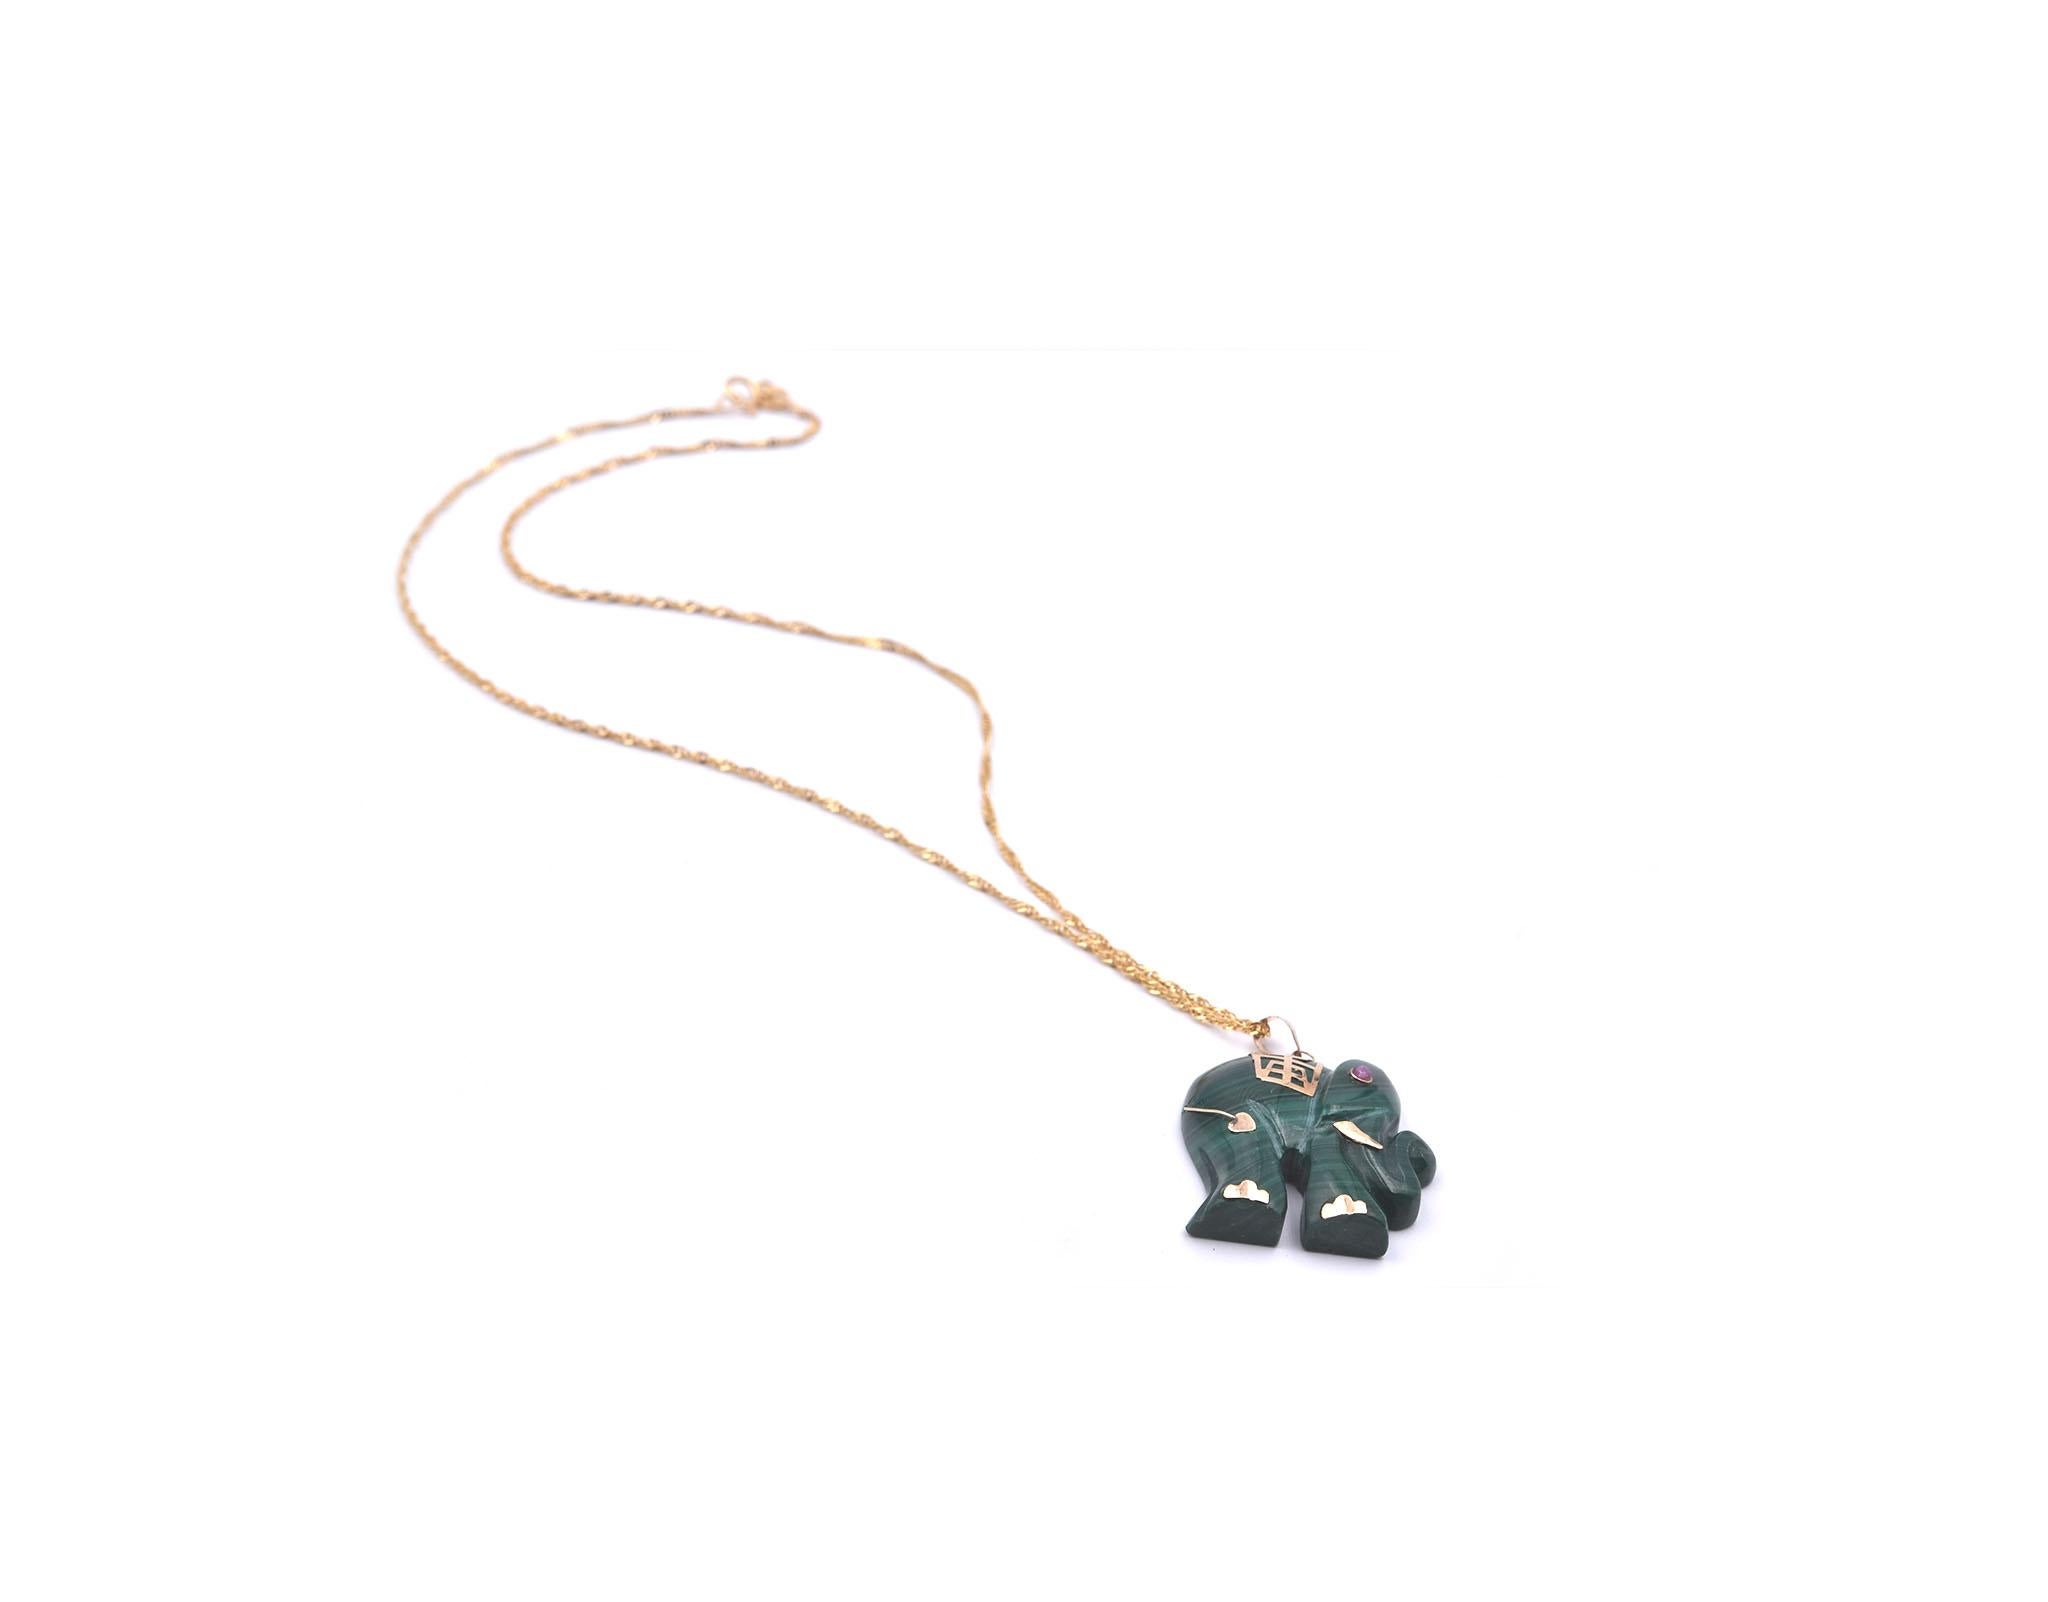 Designer: custom designed
Material: 14k yellow gold
Dimensions: necklace is 16-inches long, jade elephant is 24mm wide and 1 ¼ inches long
Weight: 10.22 grams
